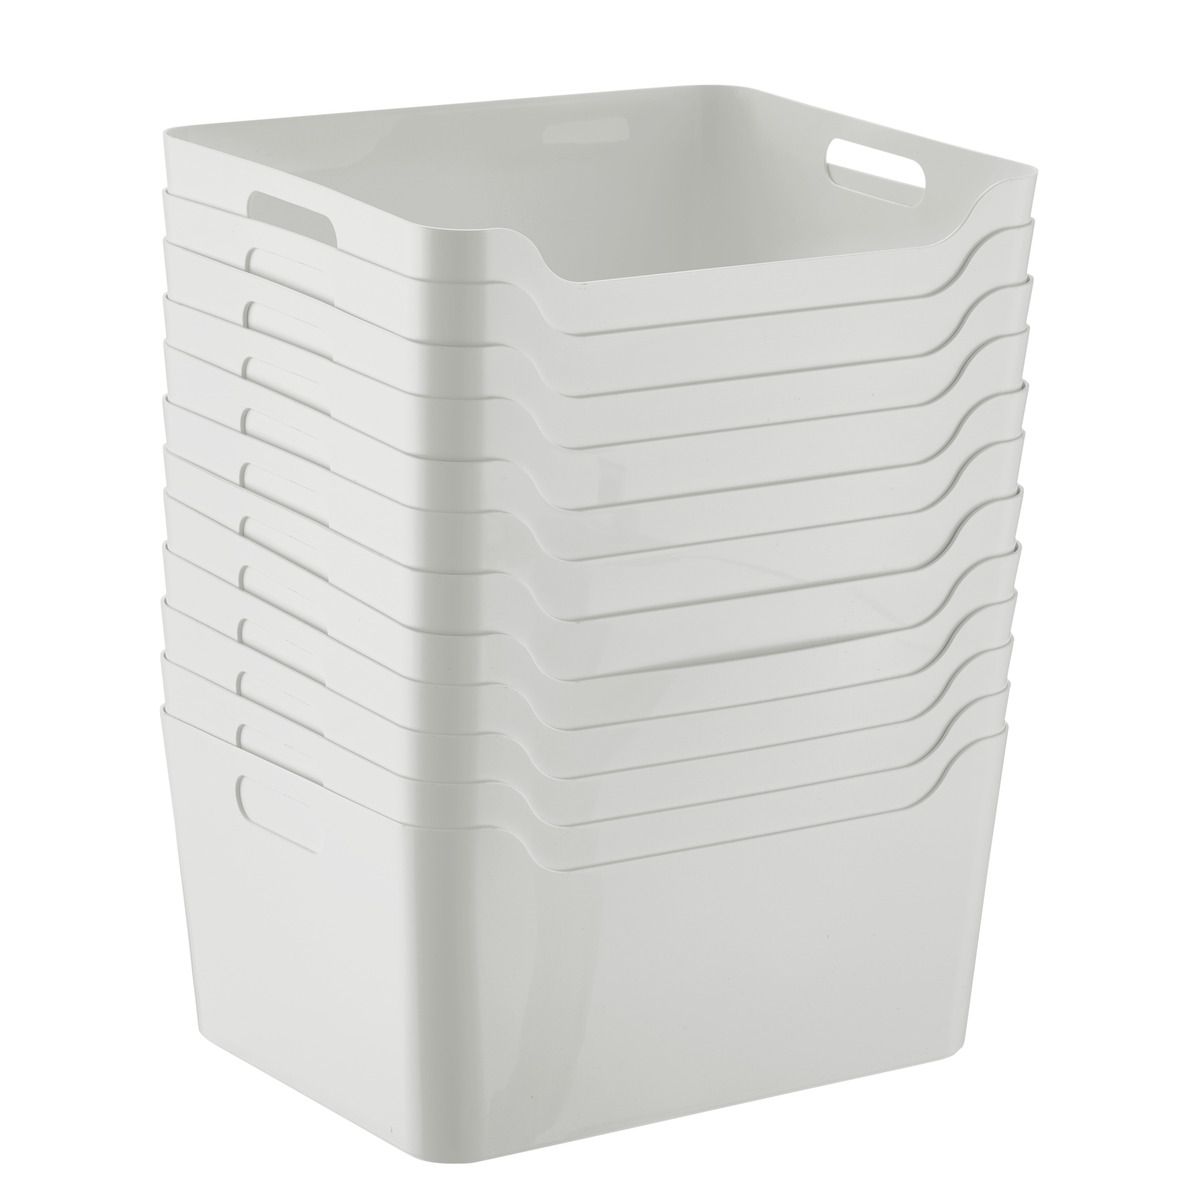 Case of 12 Large Plastic Storage Bin w/ Handles Light Grey | The Container Store